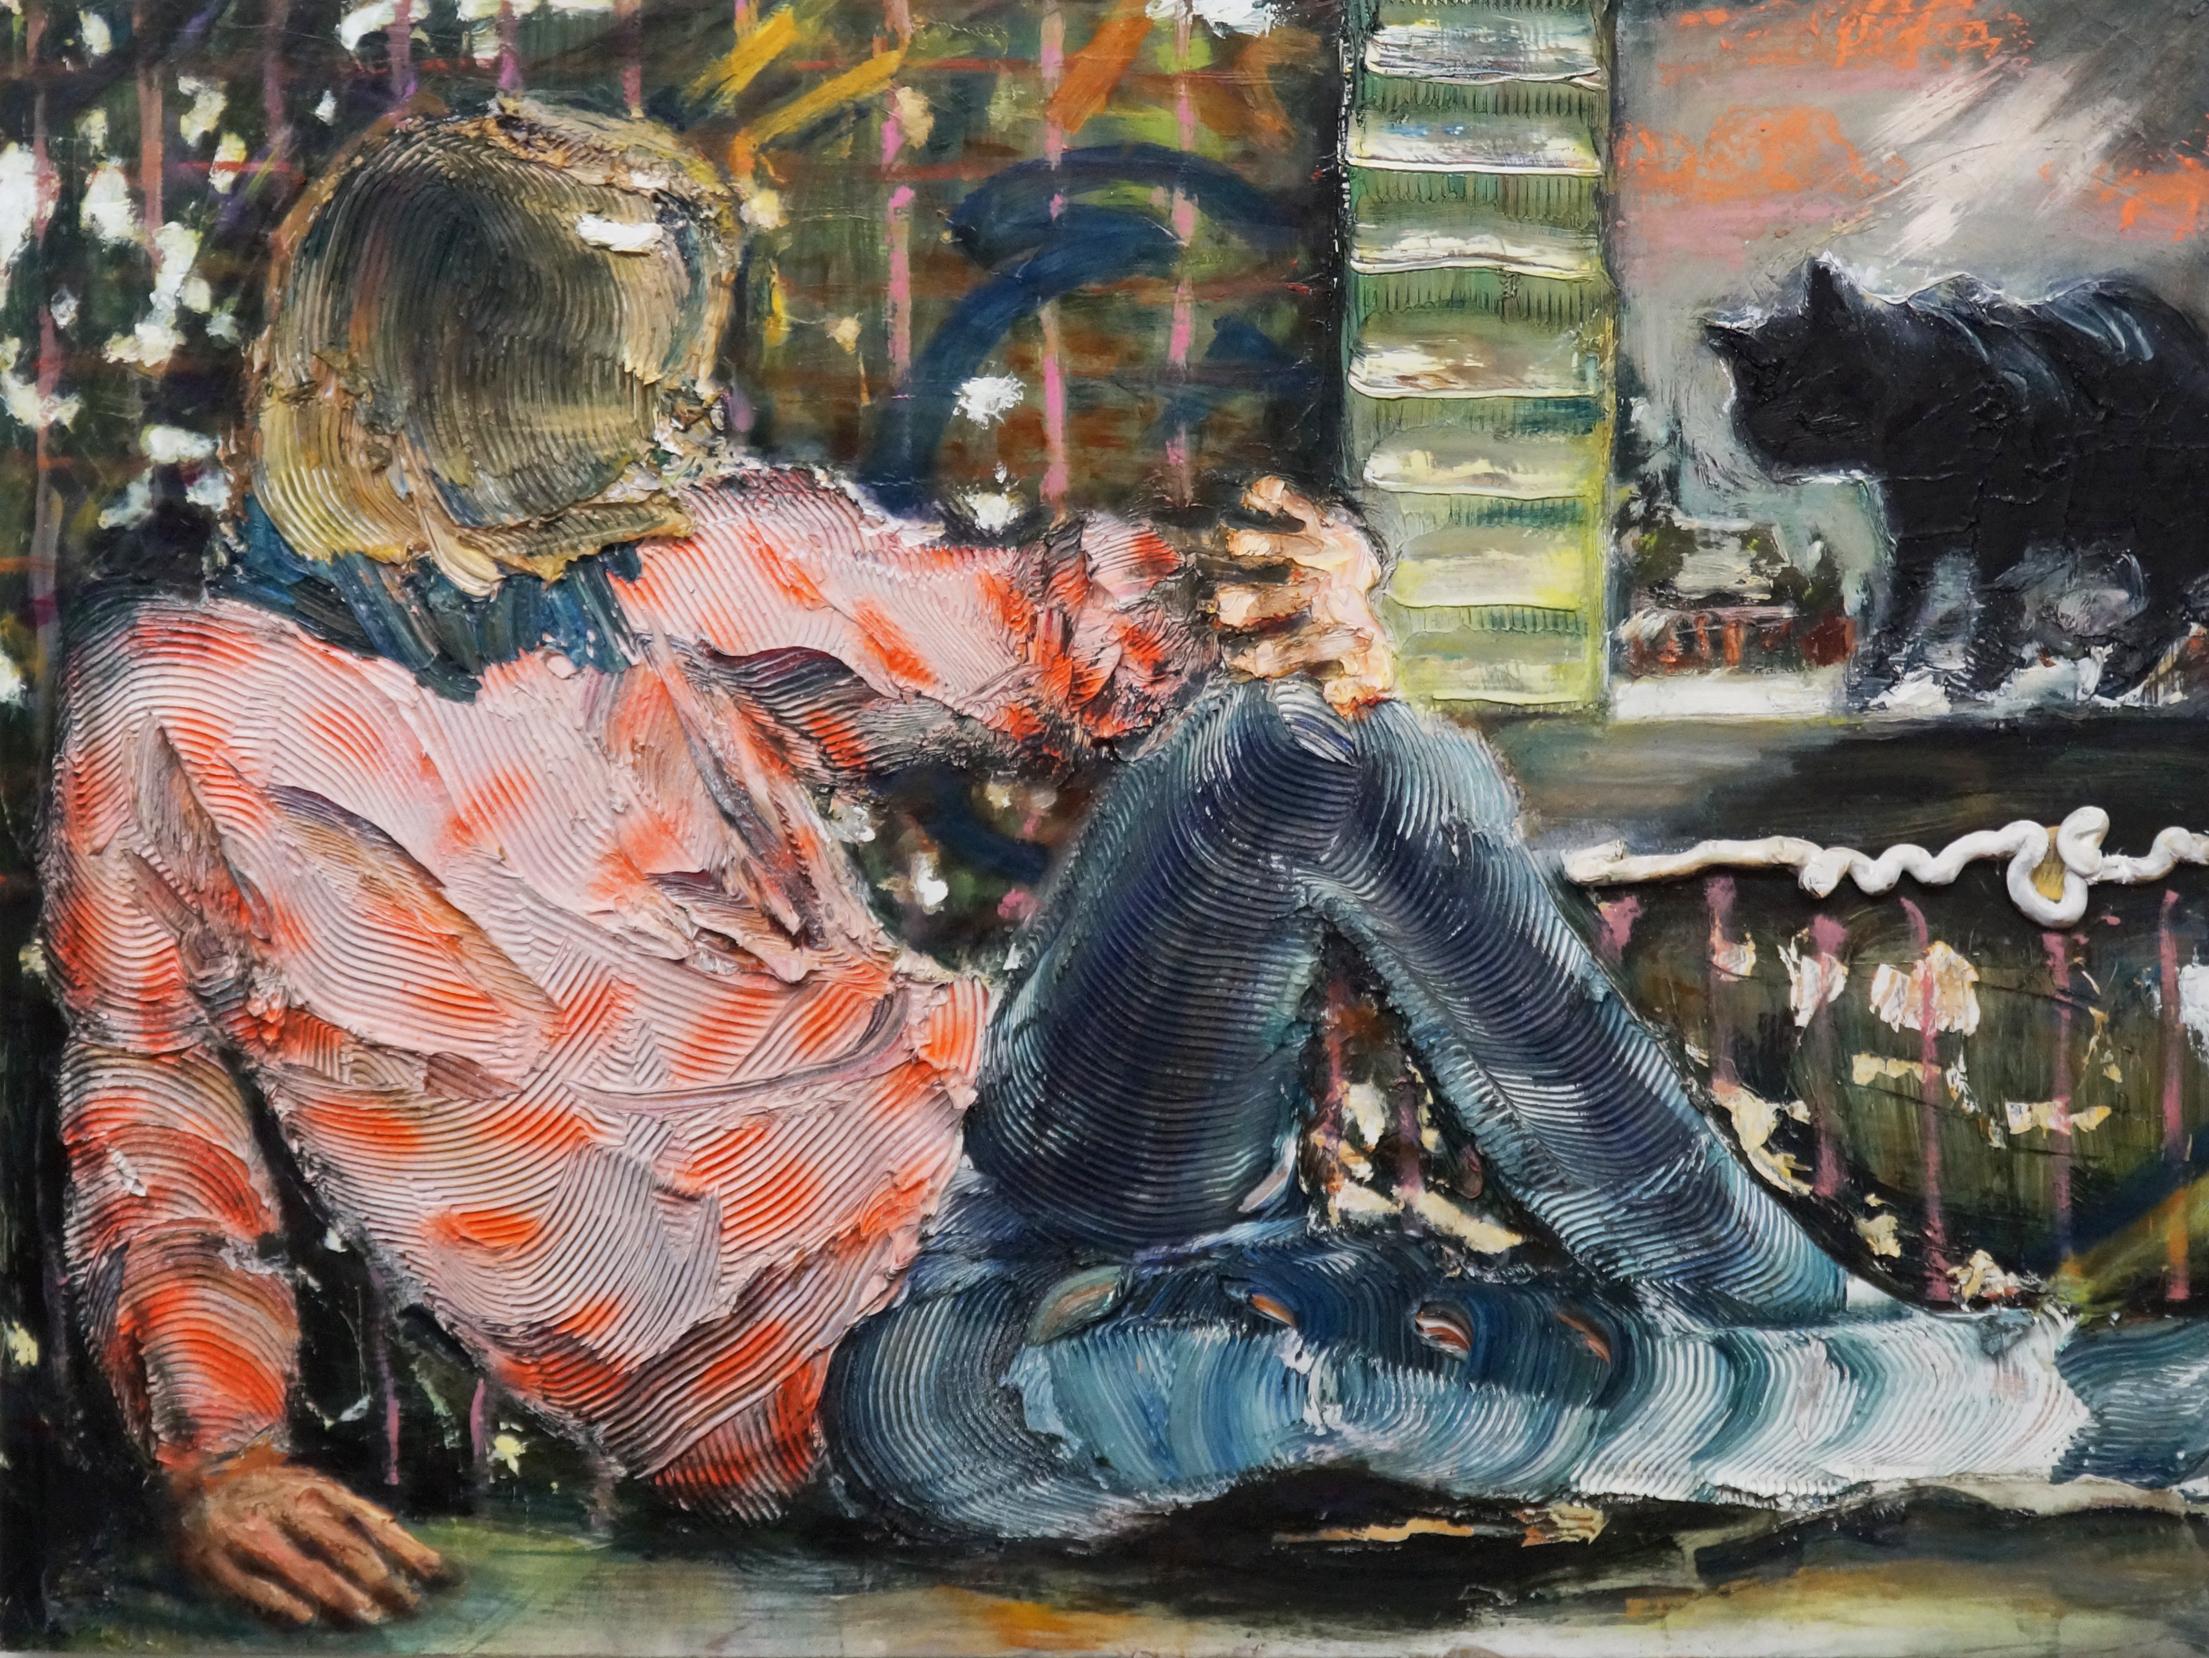 THE BLACK CAT - Textural figurative painting, woman reclining with black cat - Mixed Media Art by Eleanor Aldrich